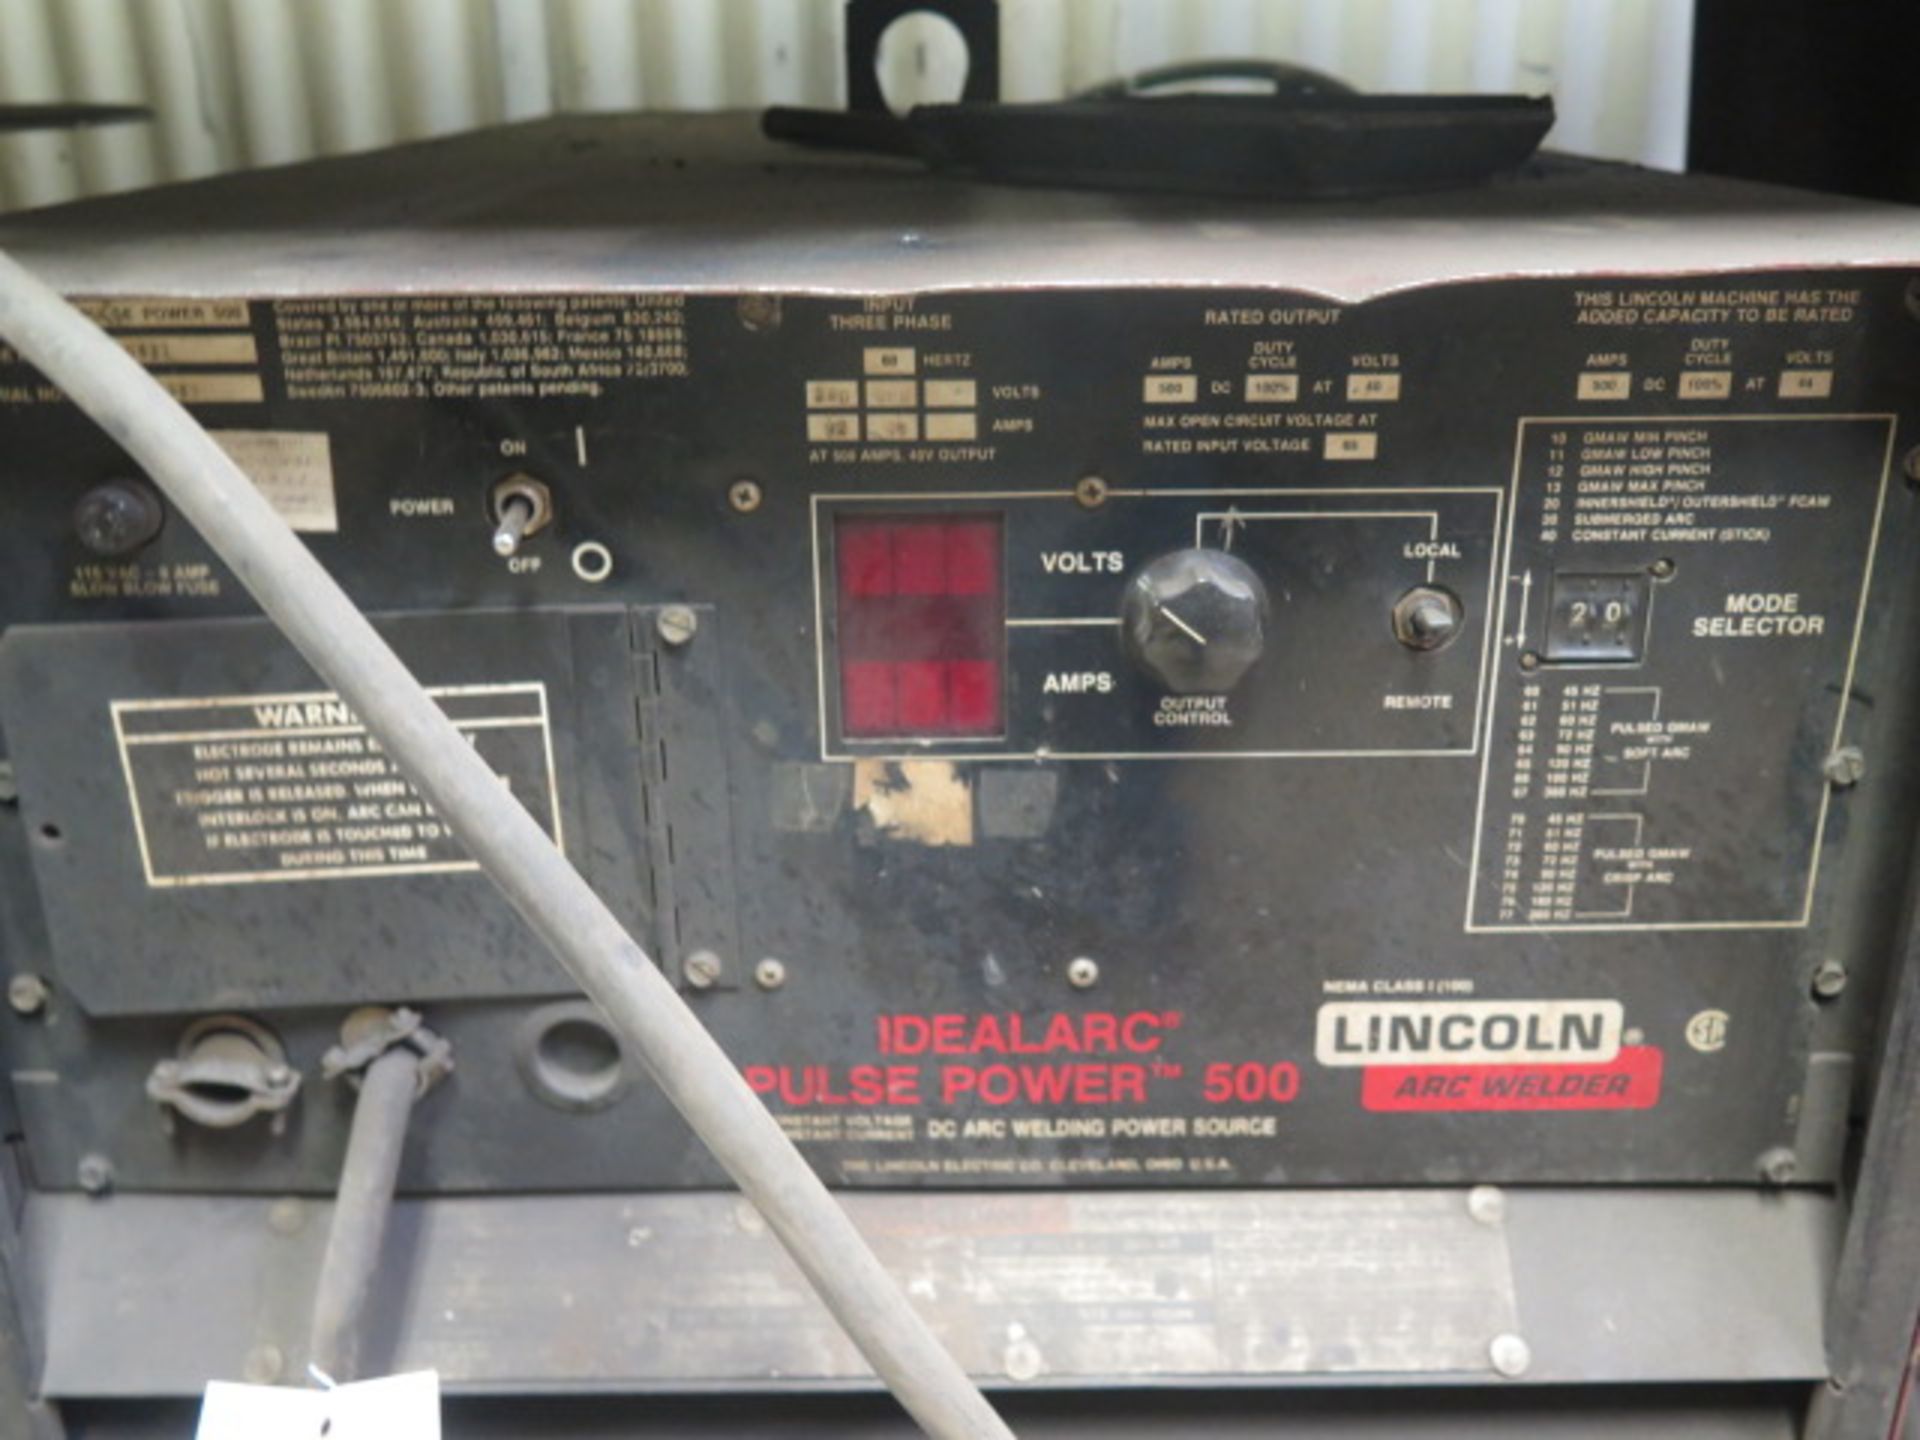 Lincoln Idealarc Power Pulse 500 CV-DC Arc Welding Power Source w/ Lincoln LN-7 Wire Feeder - Image 3 of 3